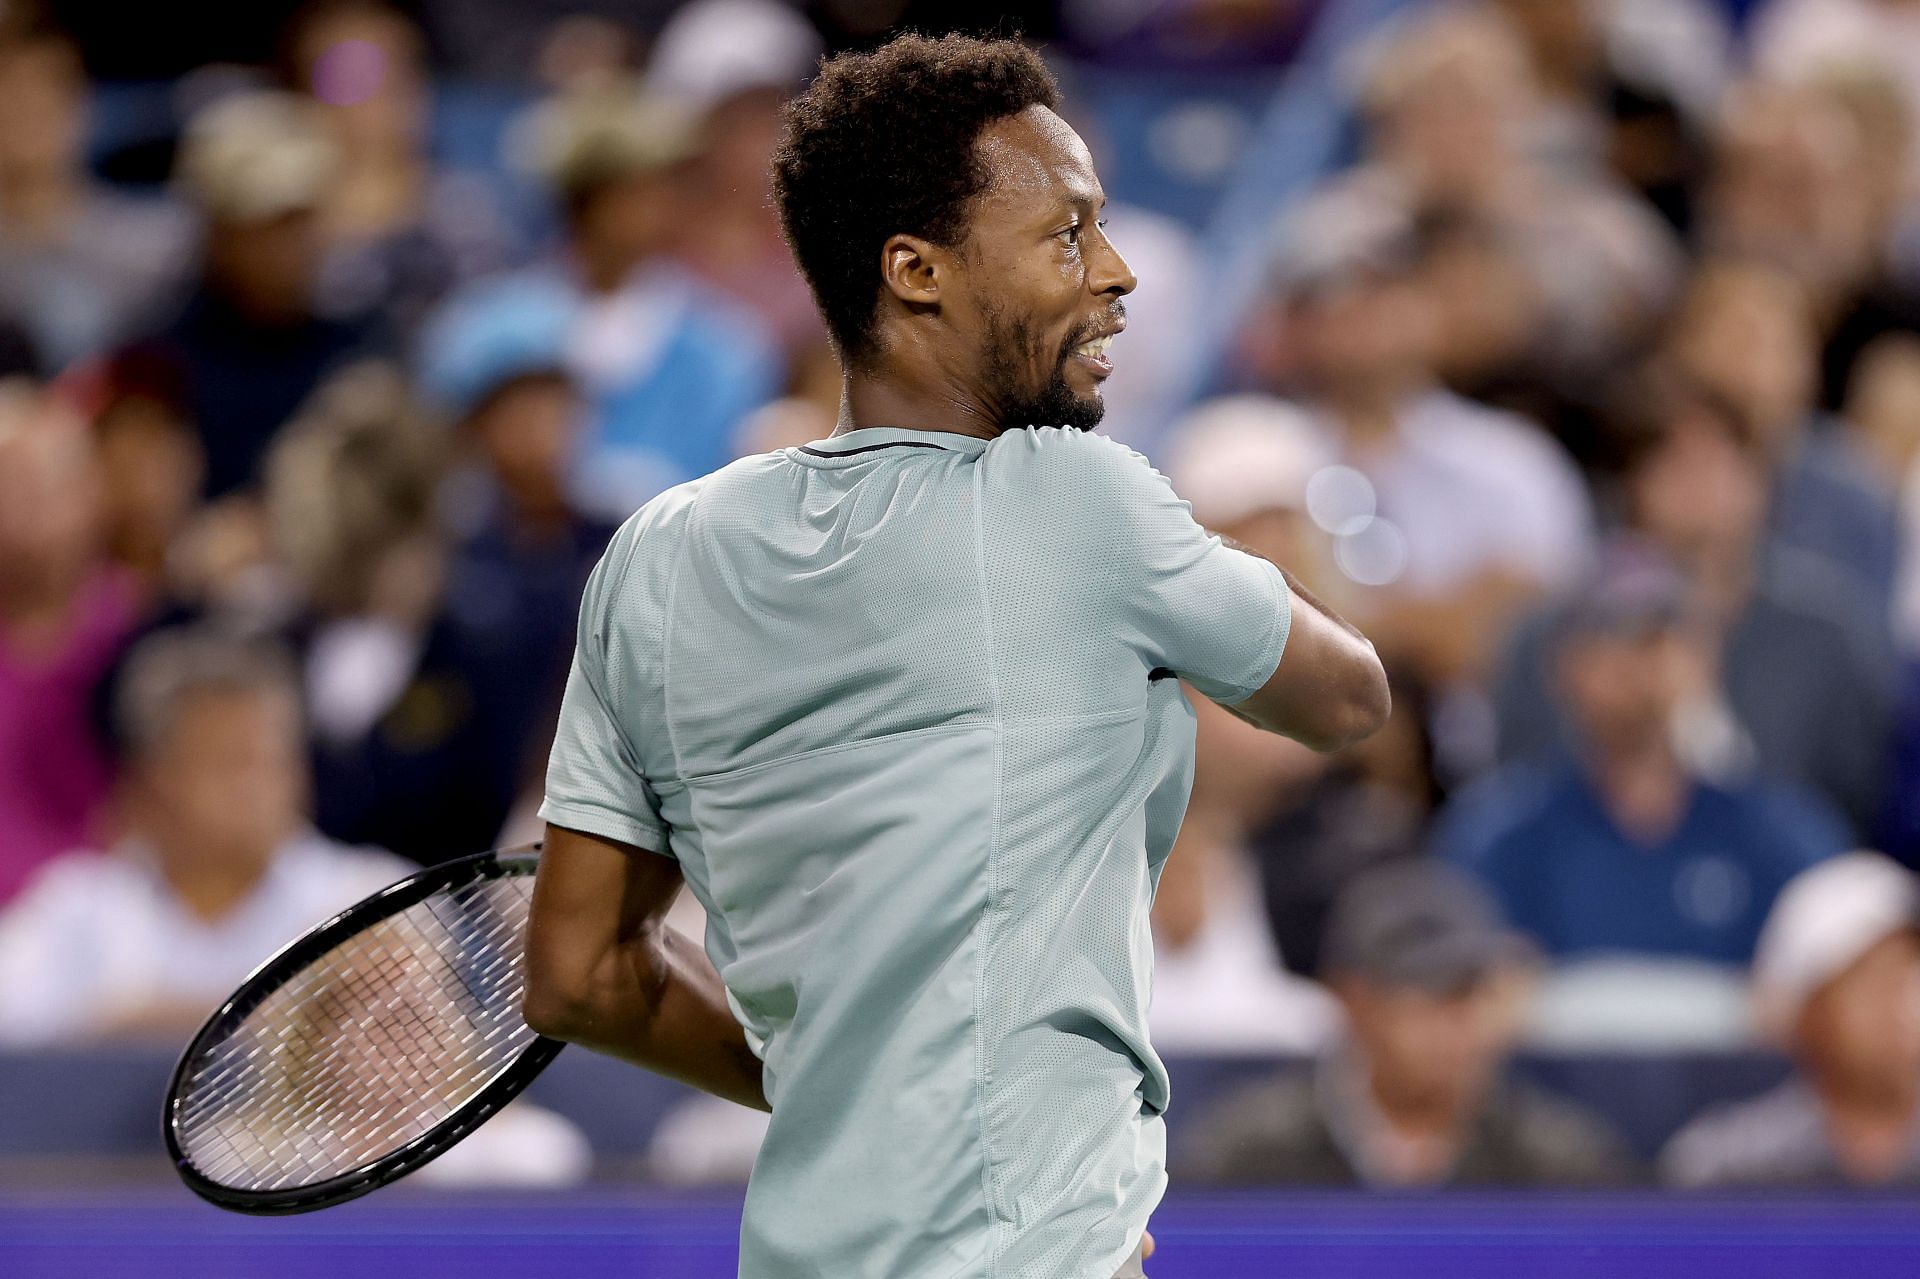 Western &amp; Southern Open - Day 5